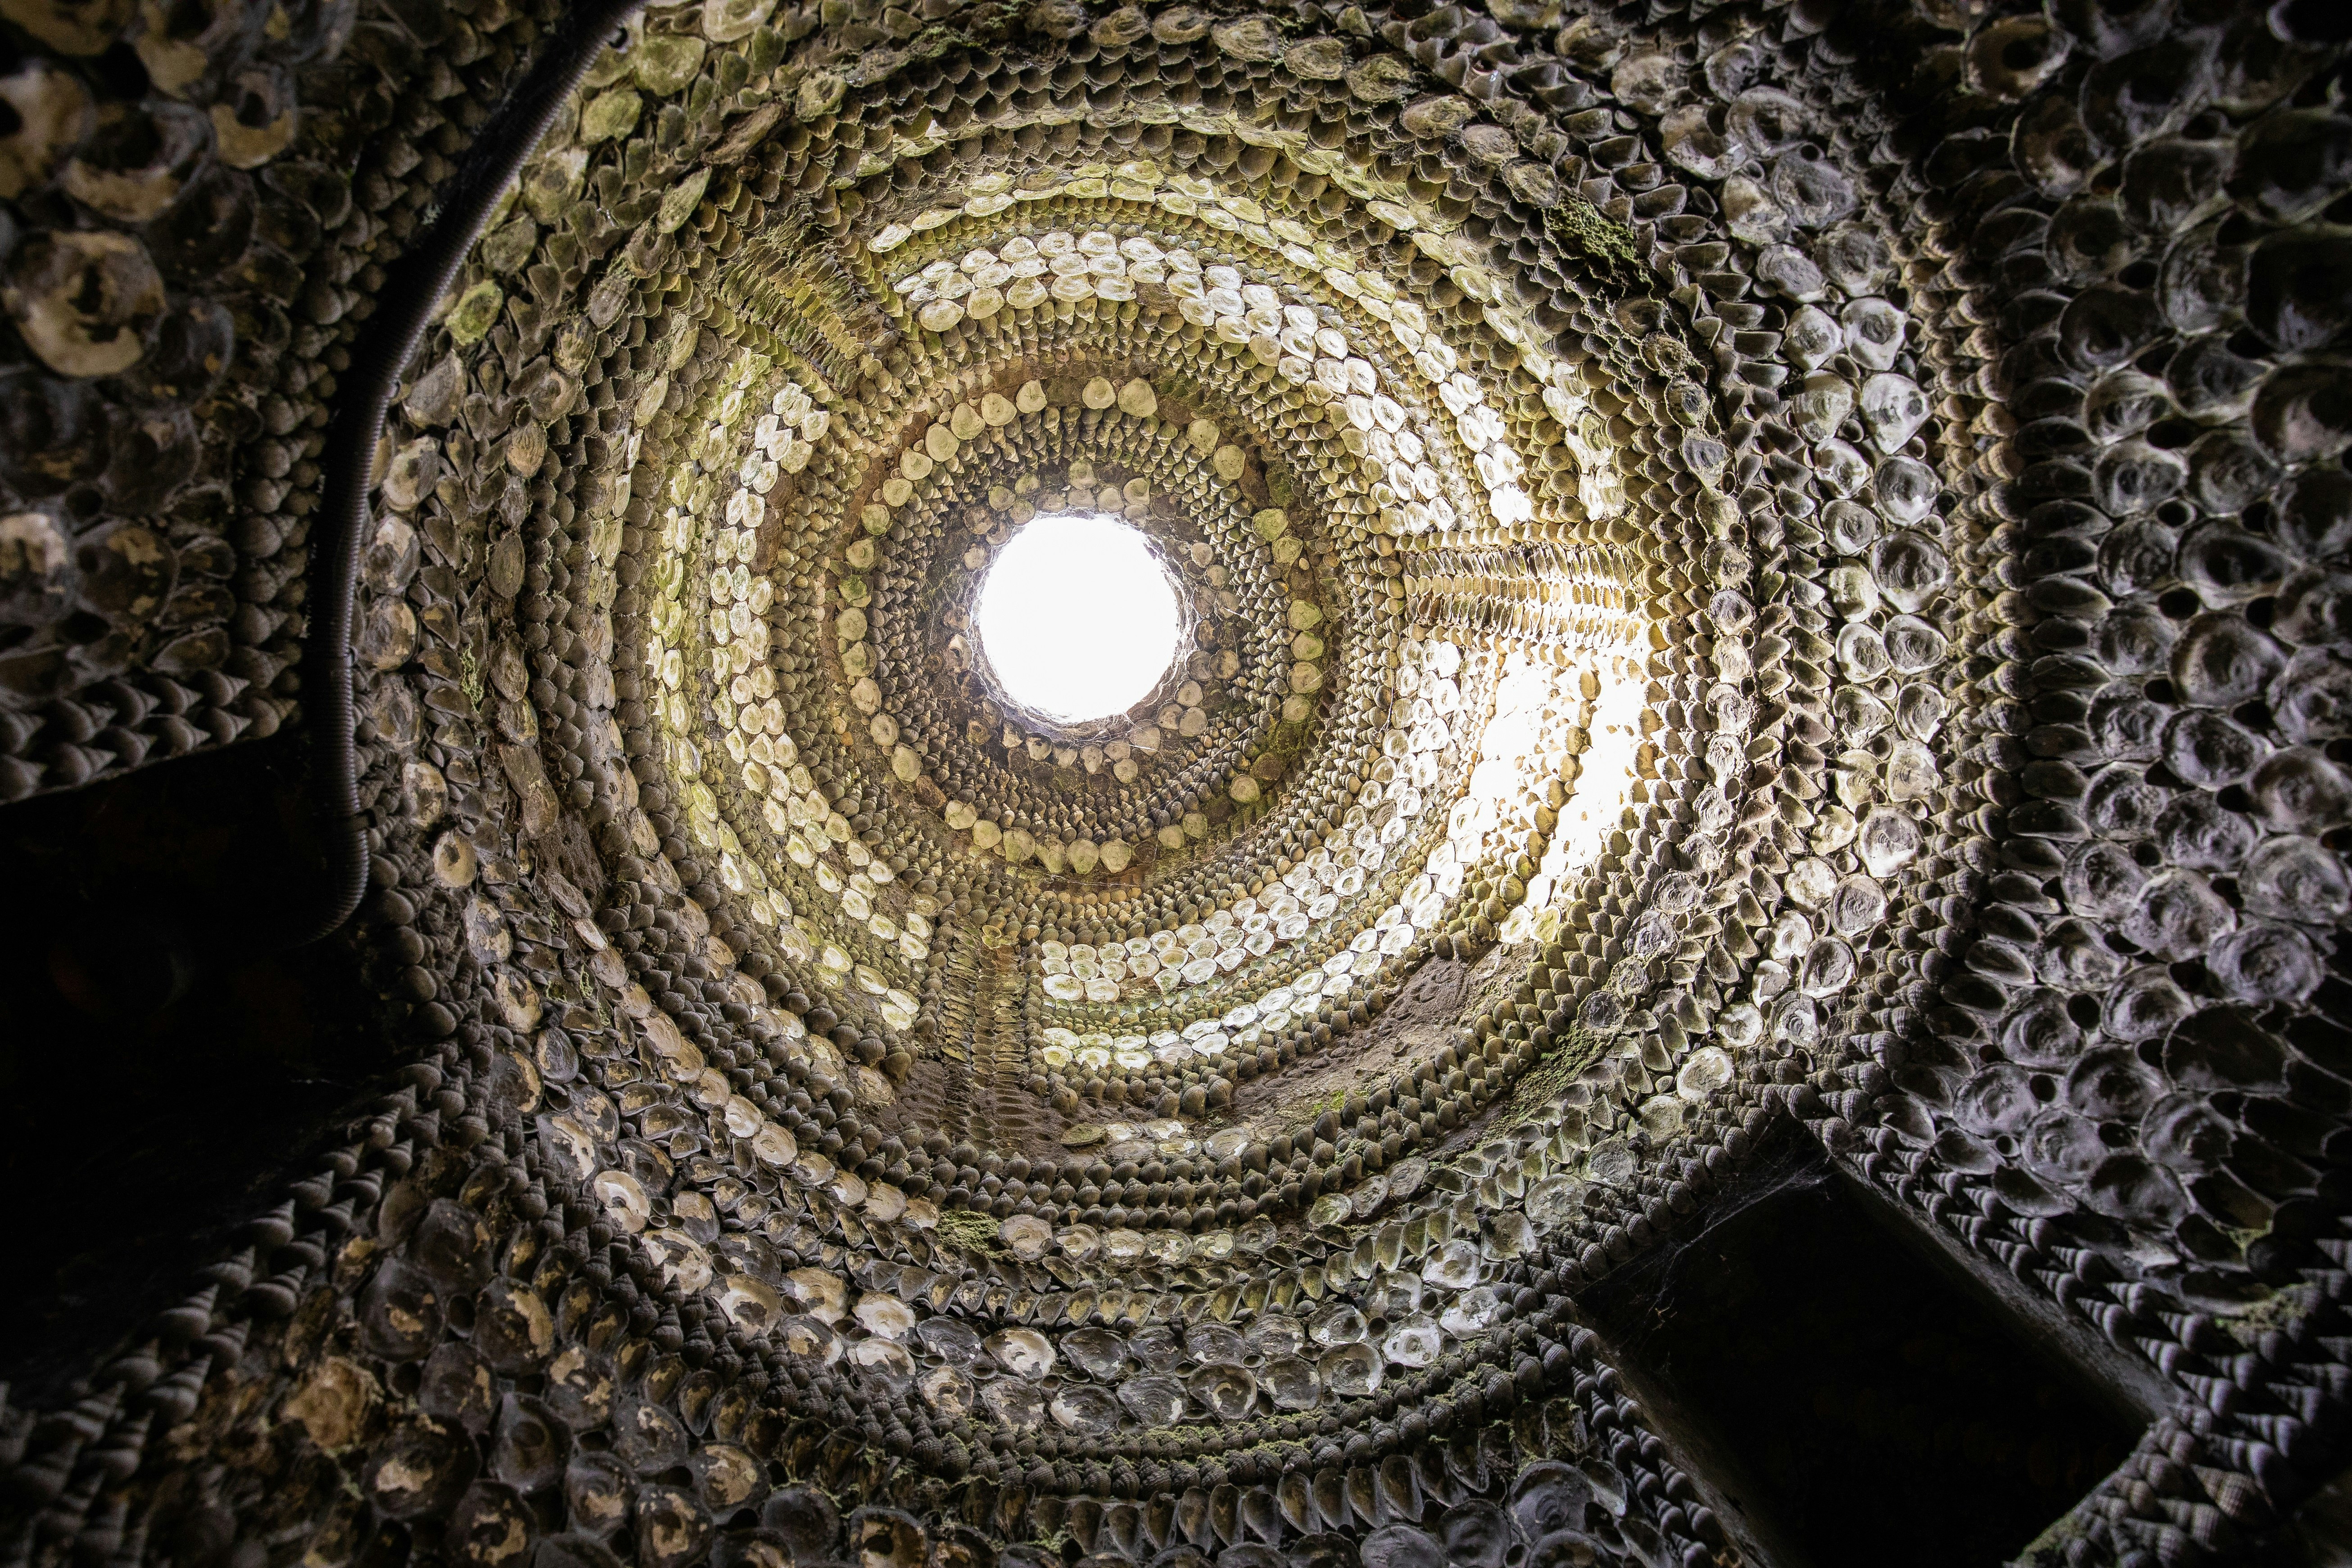 Looking up at an intricate shell-encrusted, domed ceiling in the Shell Grotto, Margate, with light appearing through a window at the top.